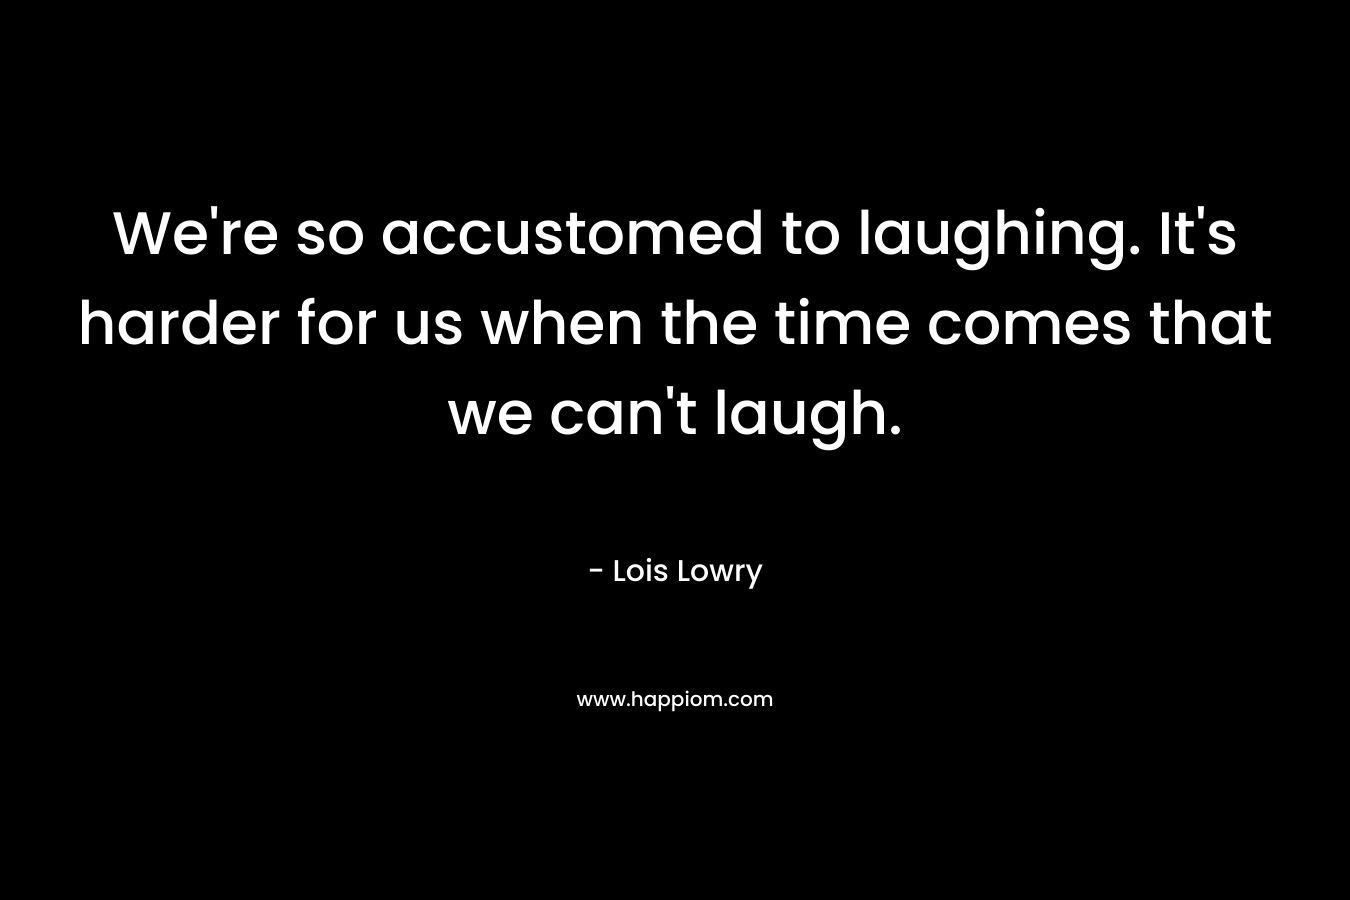 We're so accustomed to laughing. It's harder for us when the time comes that we can't laugh.